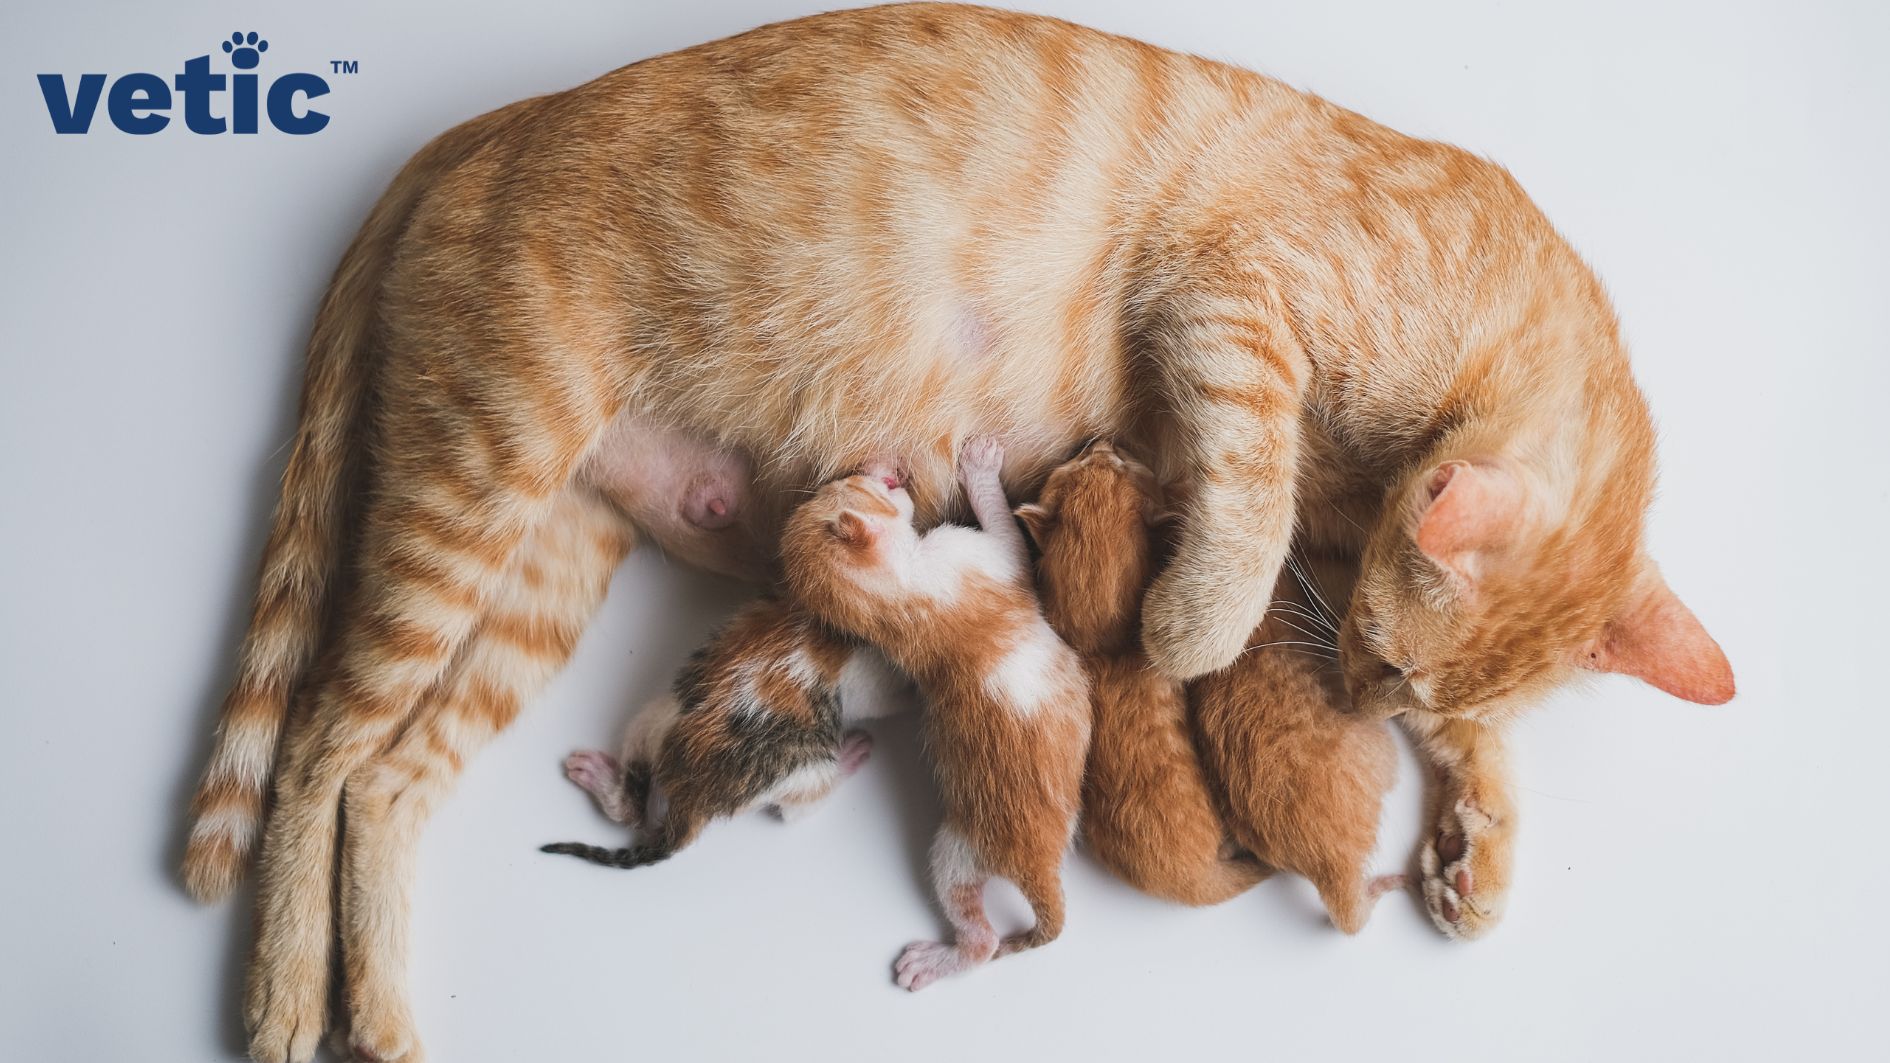 Ginger mother cat lying on a white floor, feeding her kittens. Roundworms in cats can pass on to their kittens through their milk. Deworming the mother cat before pregnancy or within the first 30 days can prevent roundworms in her kittens.